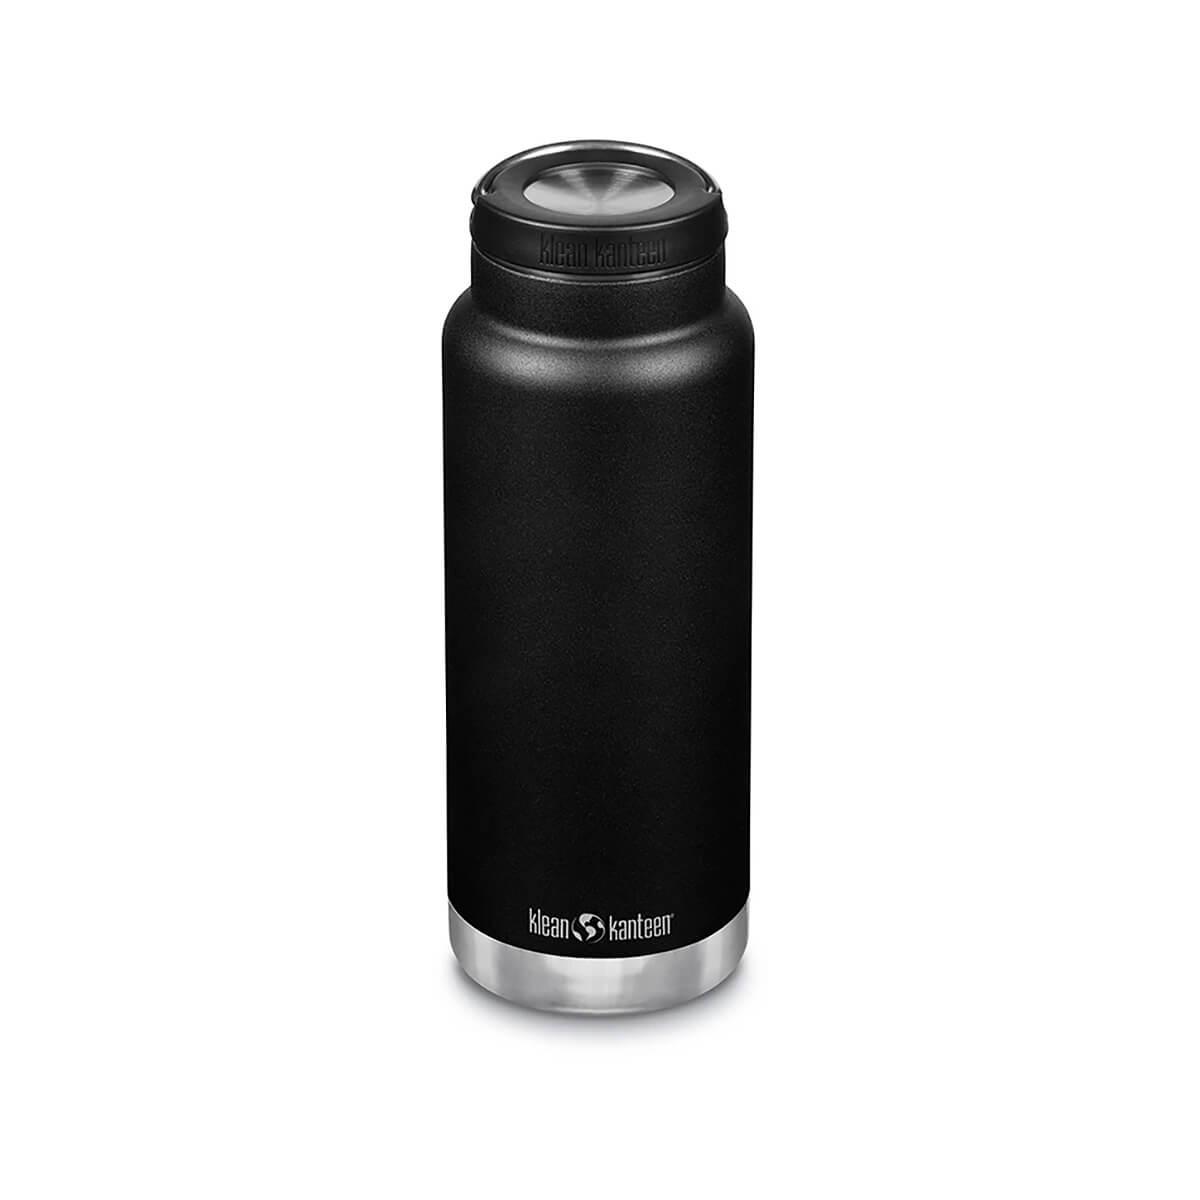 Klean Kanteen Bottle - Classic Insulated Stainless Steel with Loop Cap